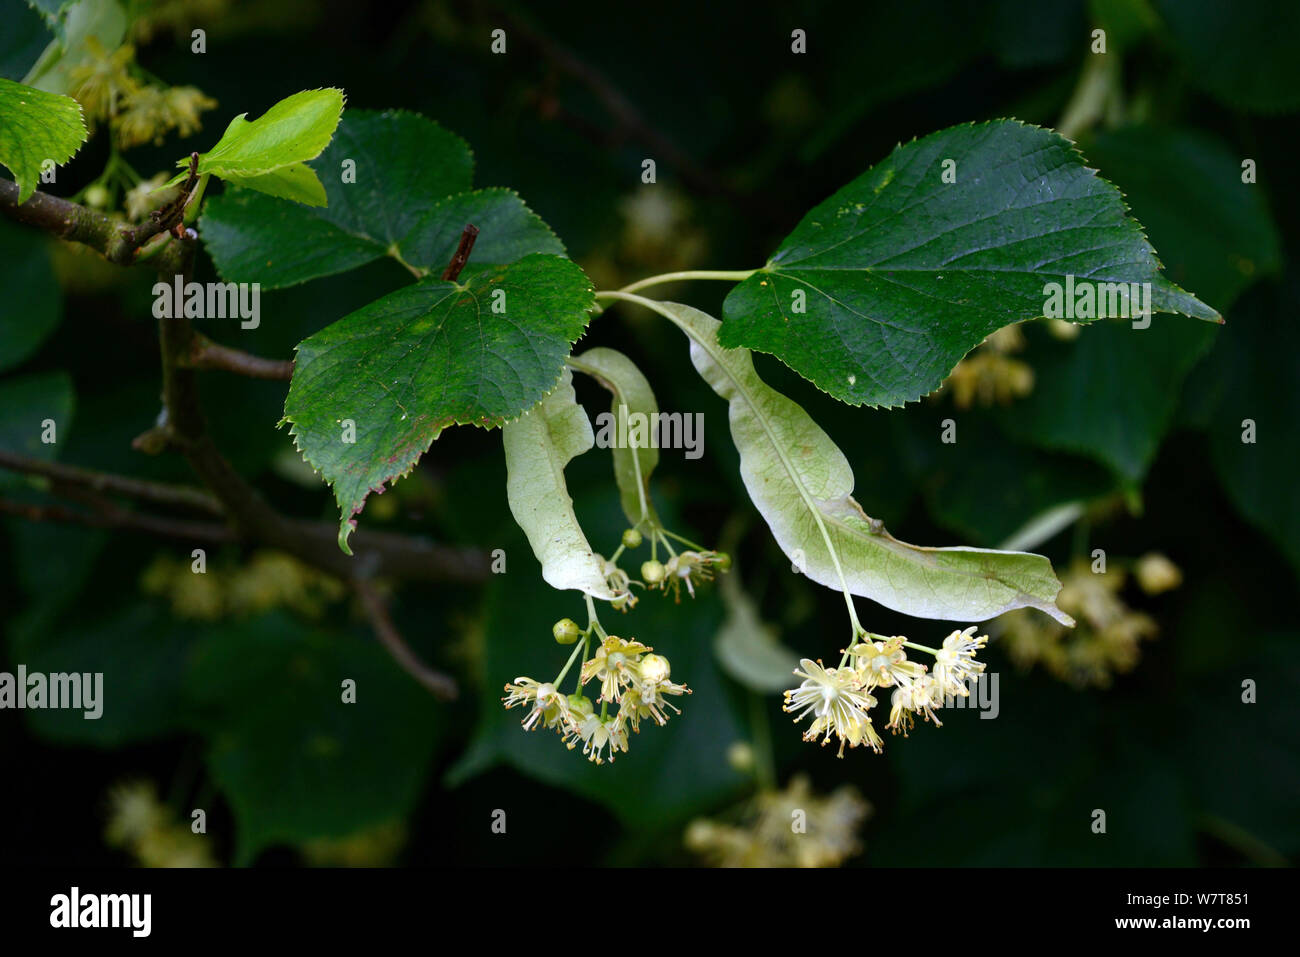 Small-leaved Lime (Tilia cordata) flowers and leaves, Herefordshire, England, July. Stock Photo